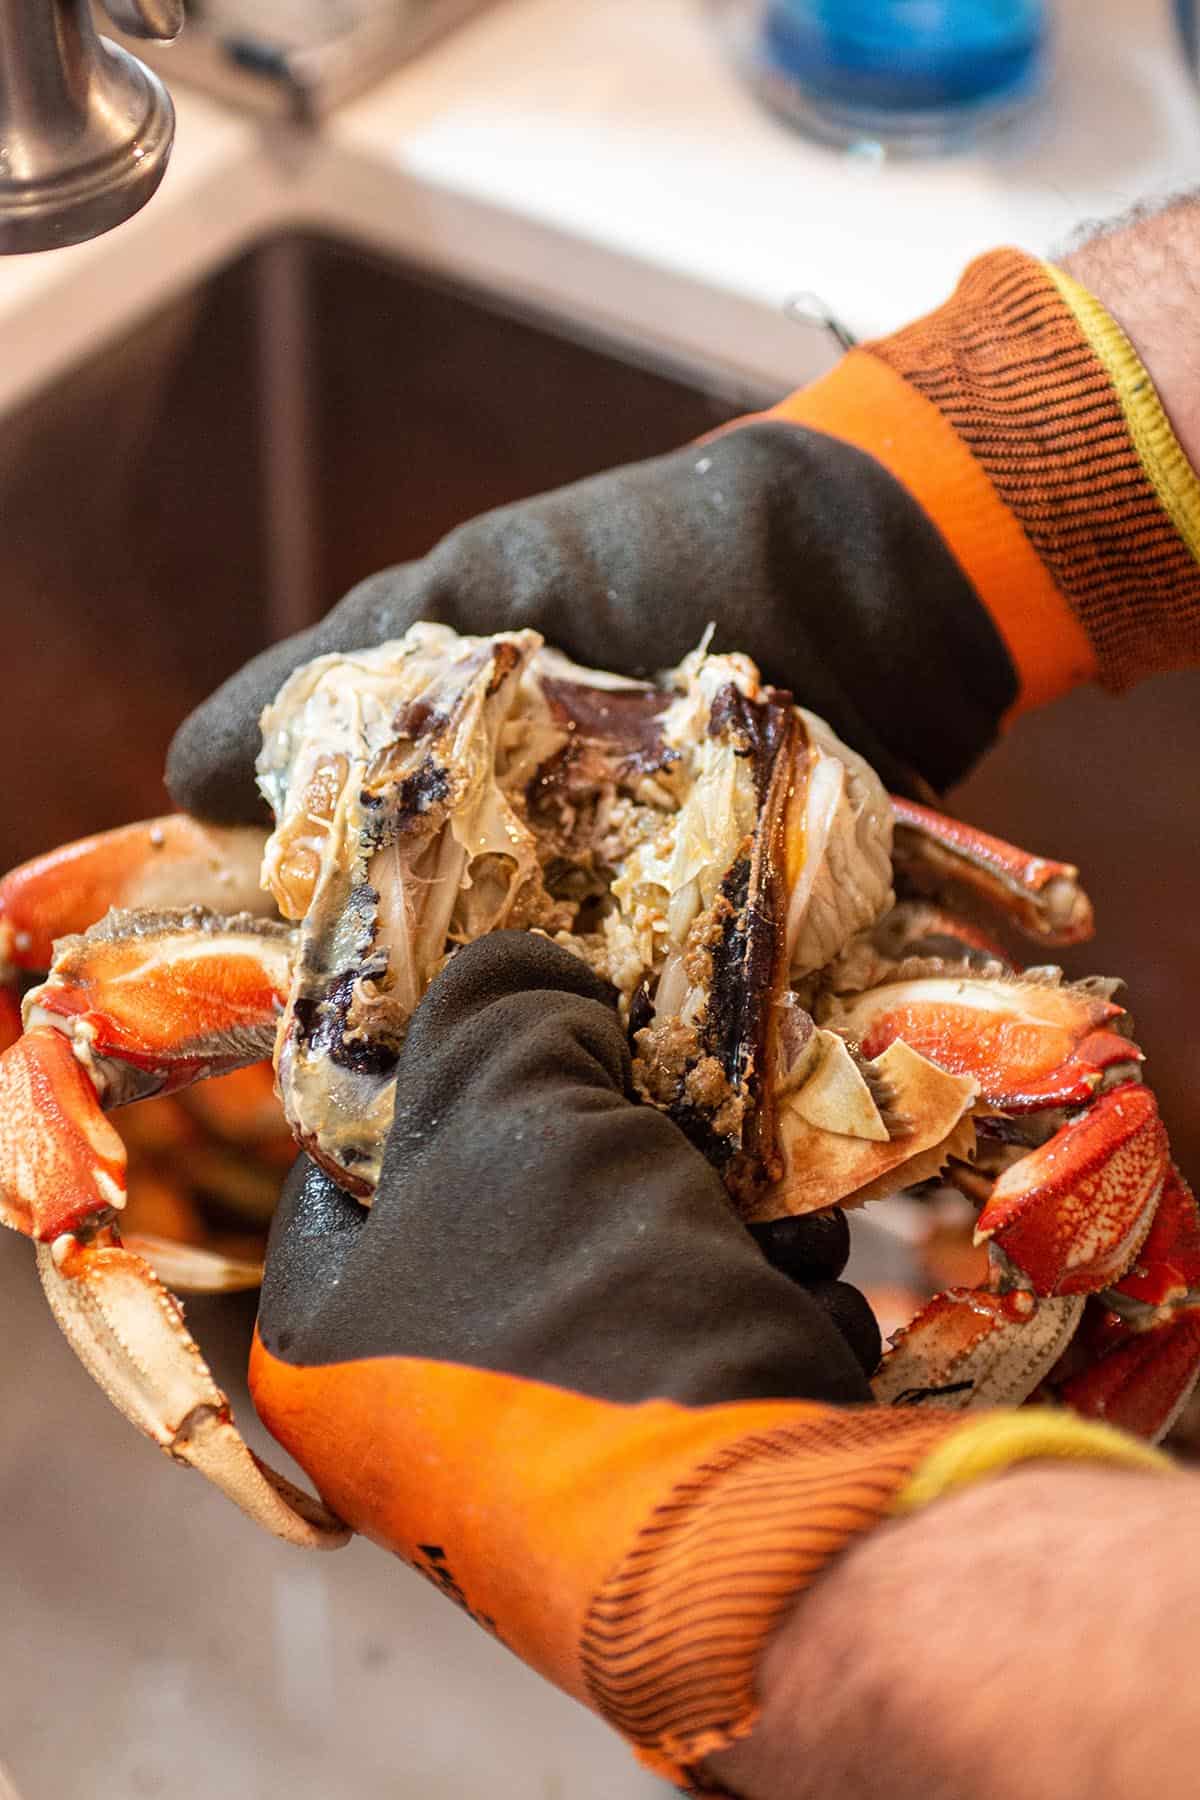 Two hands removing parts of a Dungeness crab.